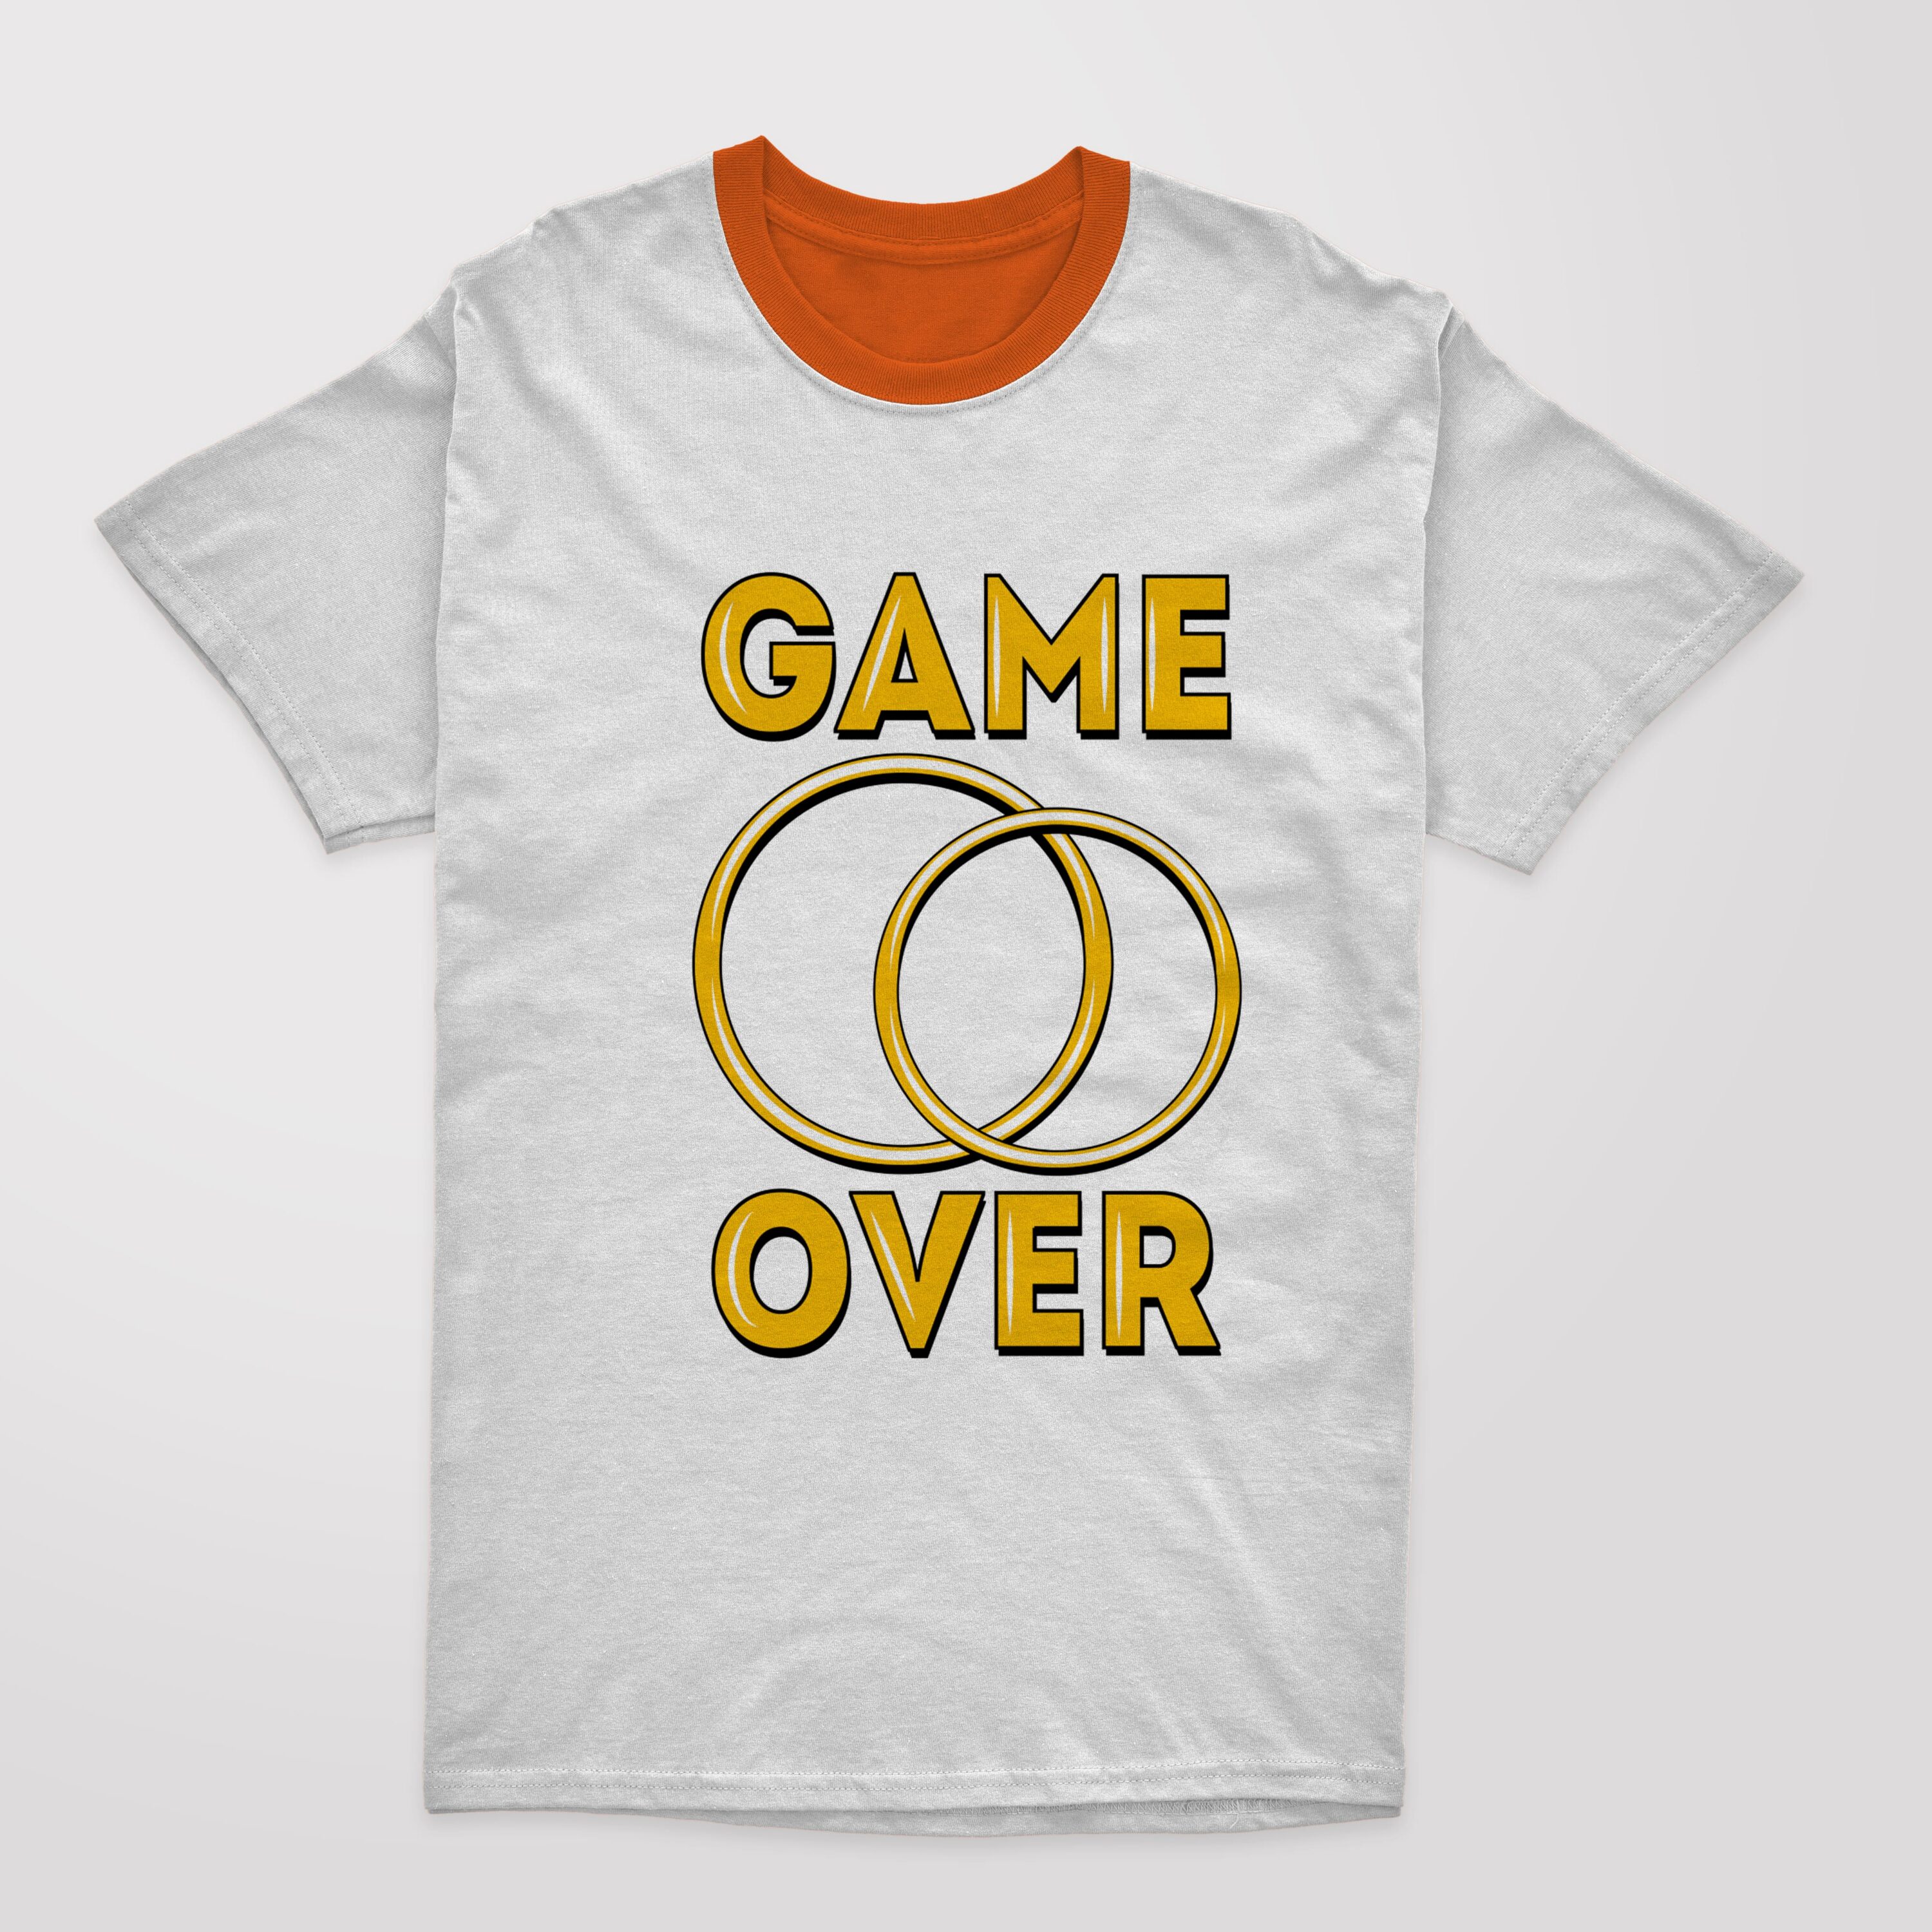 Image of a t-shirt with a beautiful print of wedding rings and the inscription "Game over".